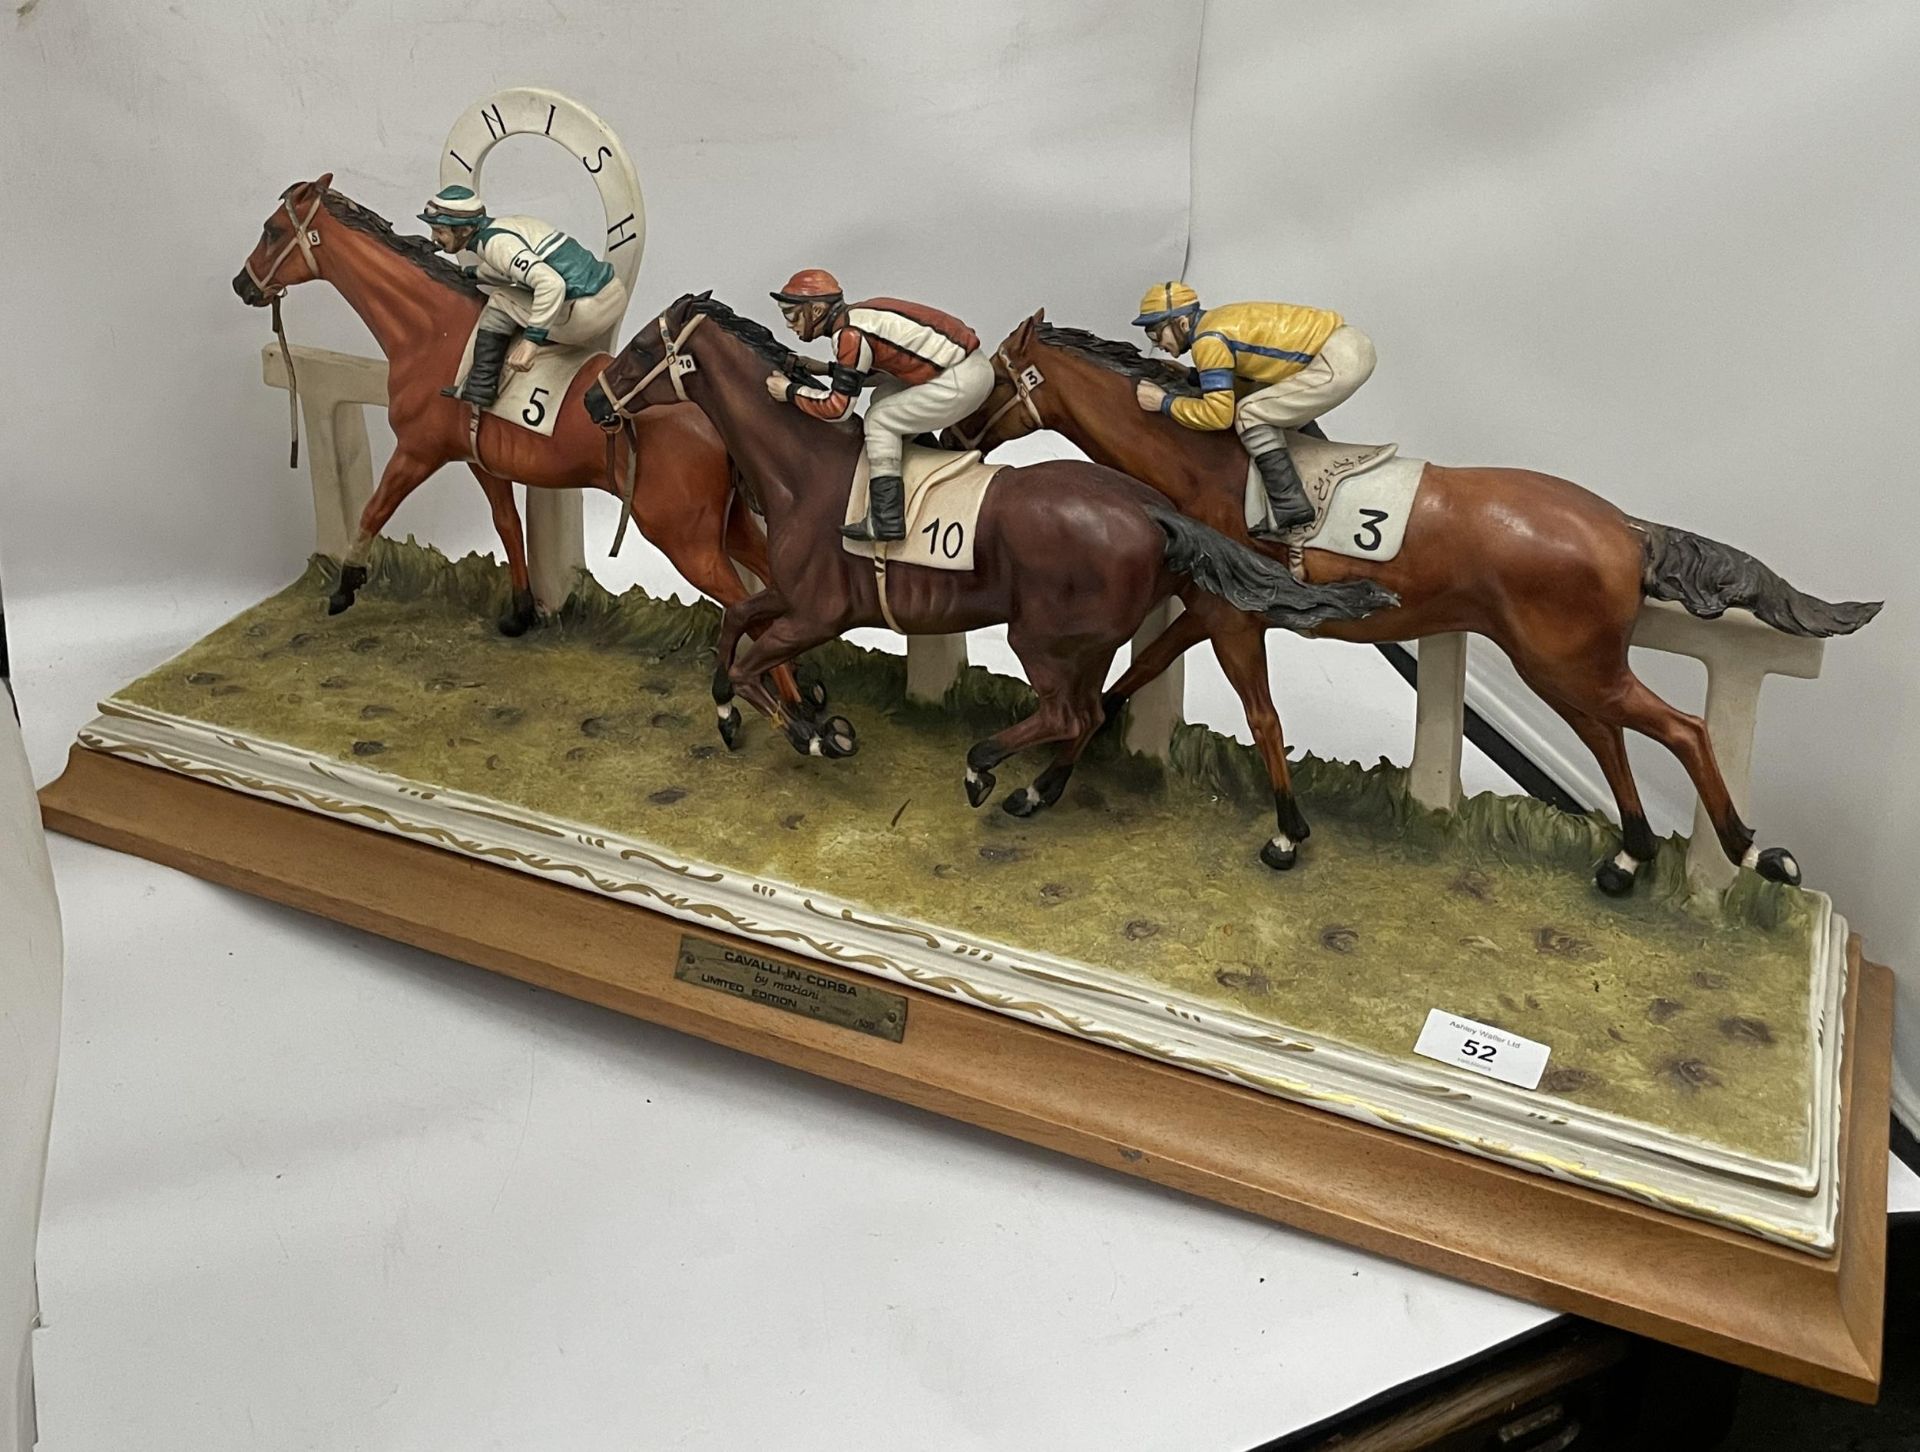 A LARGE LIMITED EDITION CAPODIMONTE CAVALLI IN CORSA HORSE RACING TABLEAU FIGURE BY MAZIANI,